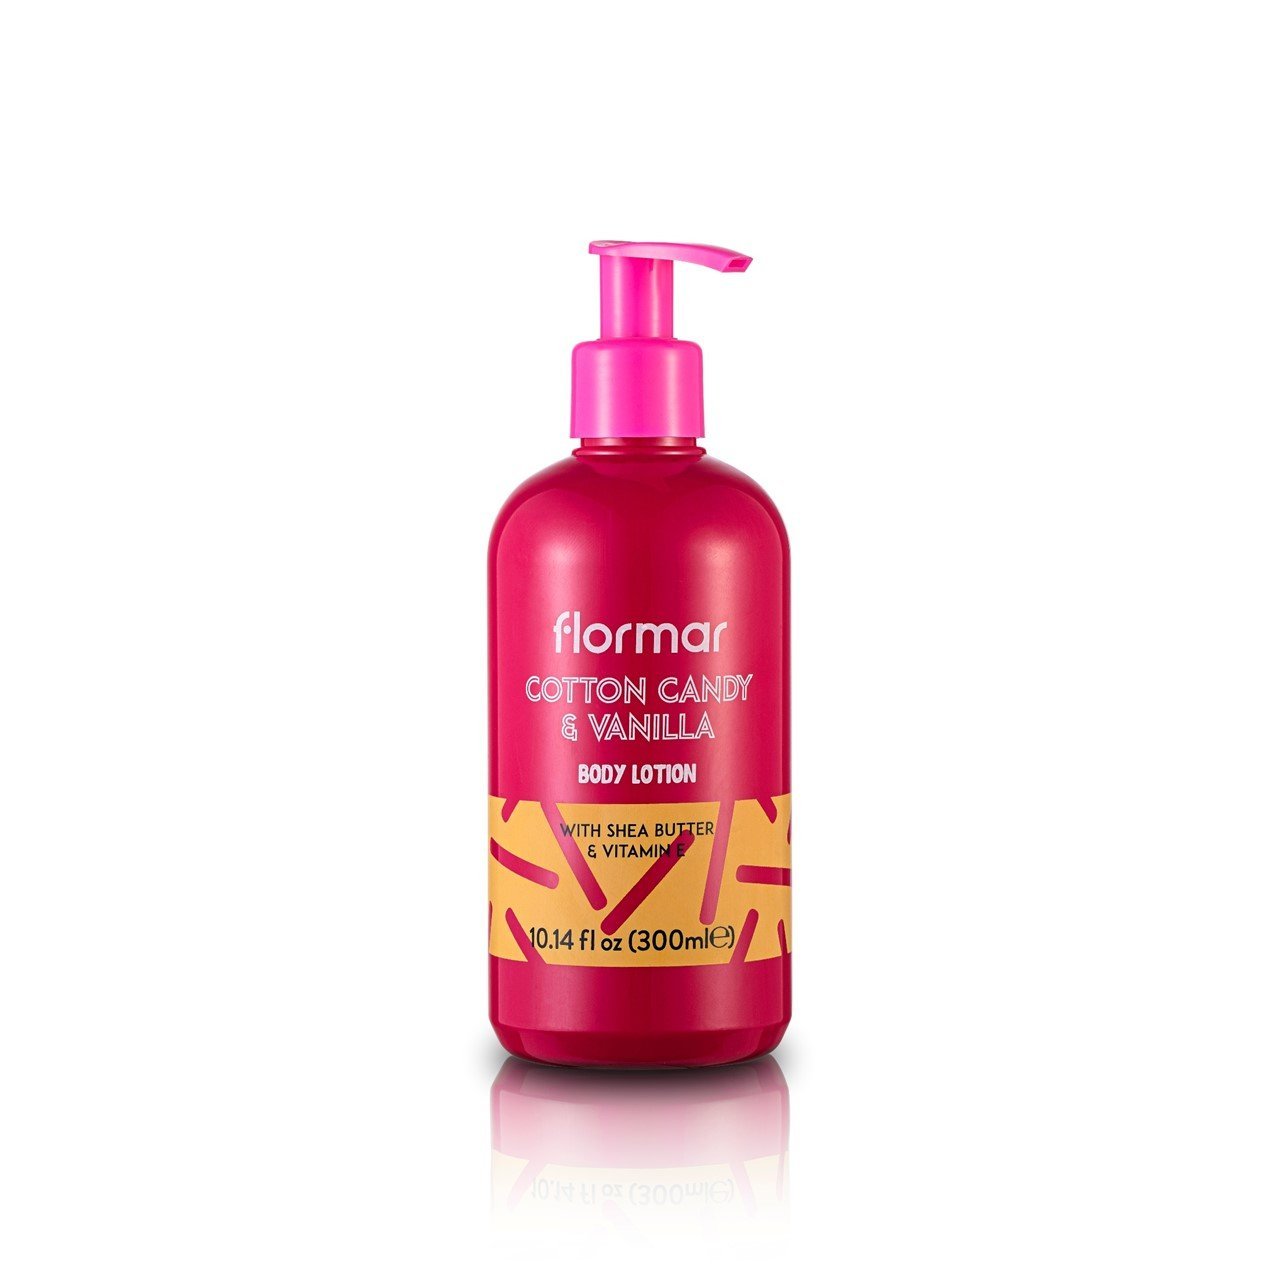 FLORMAR Cotton Candy and Vanilla Body Lotion